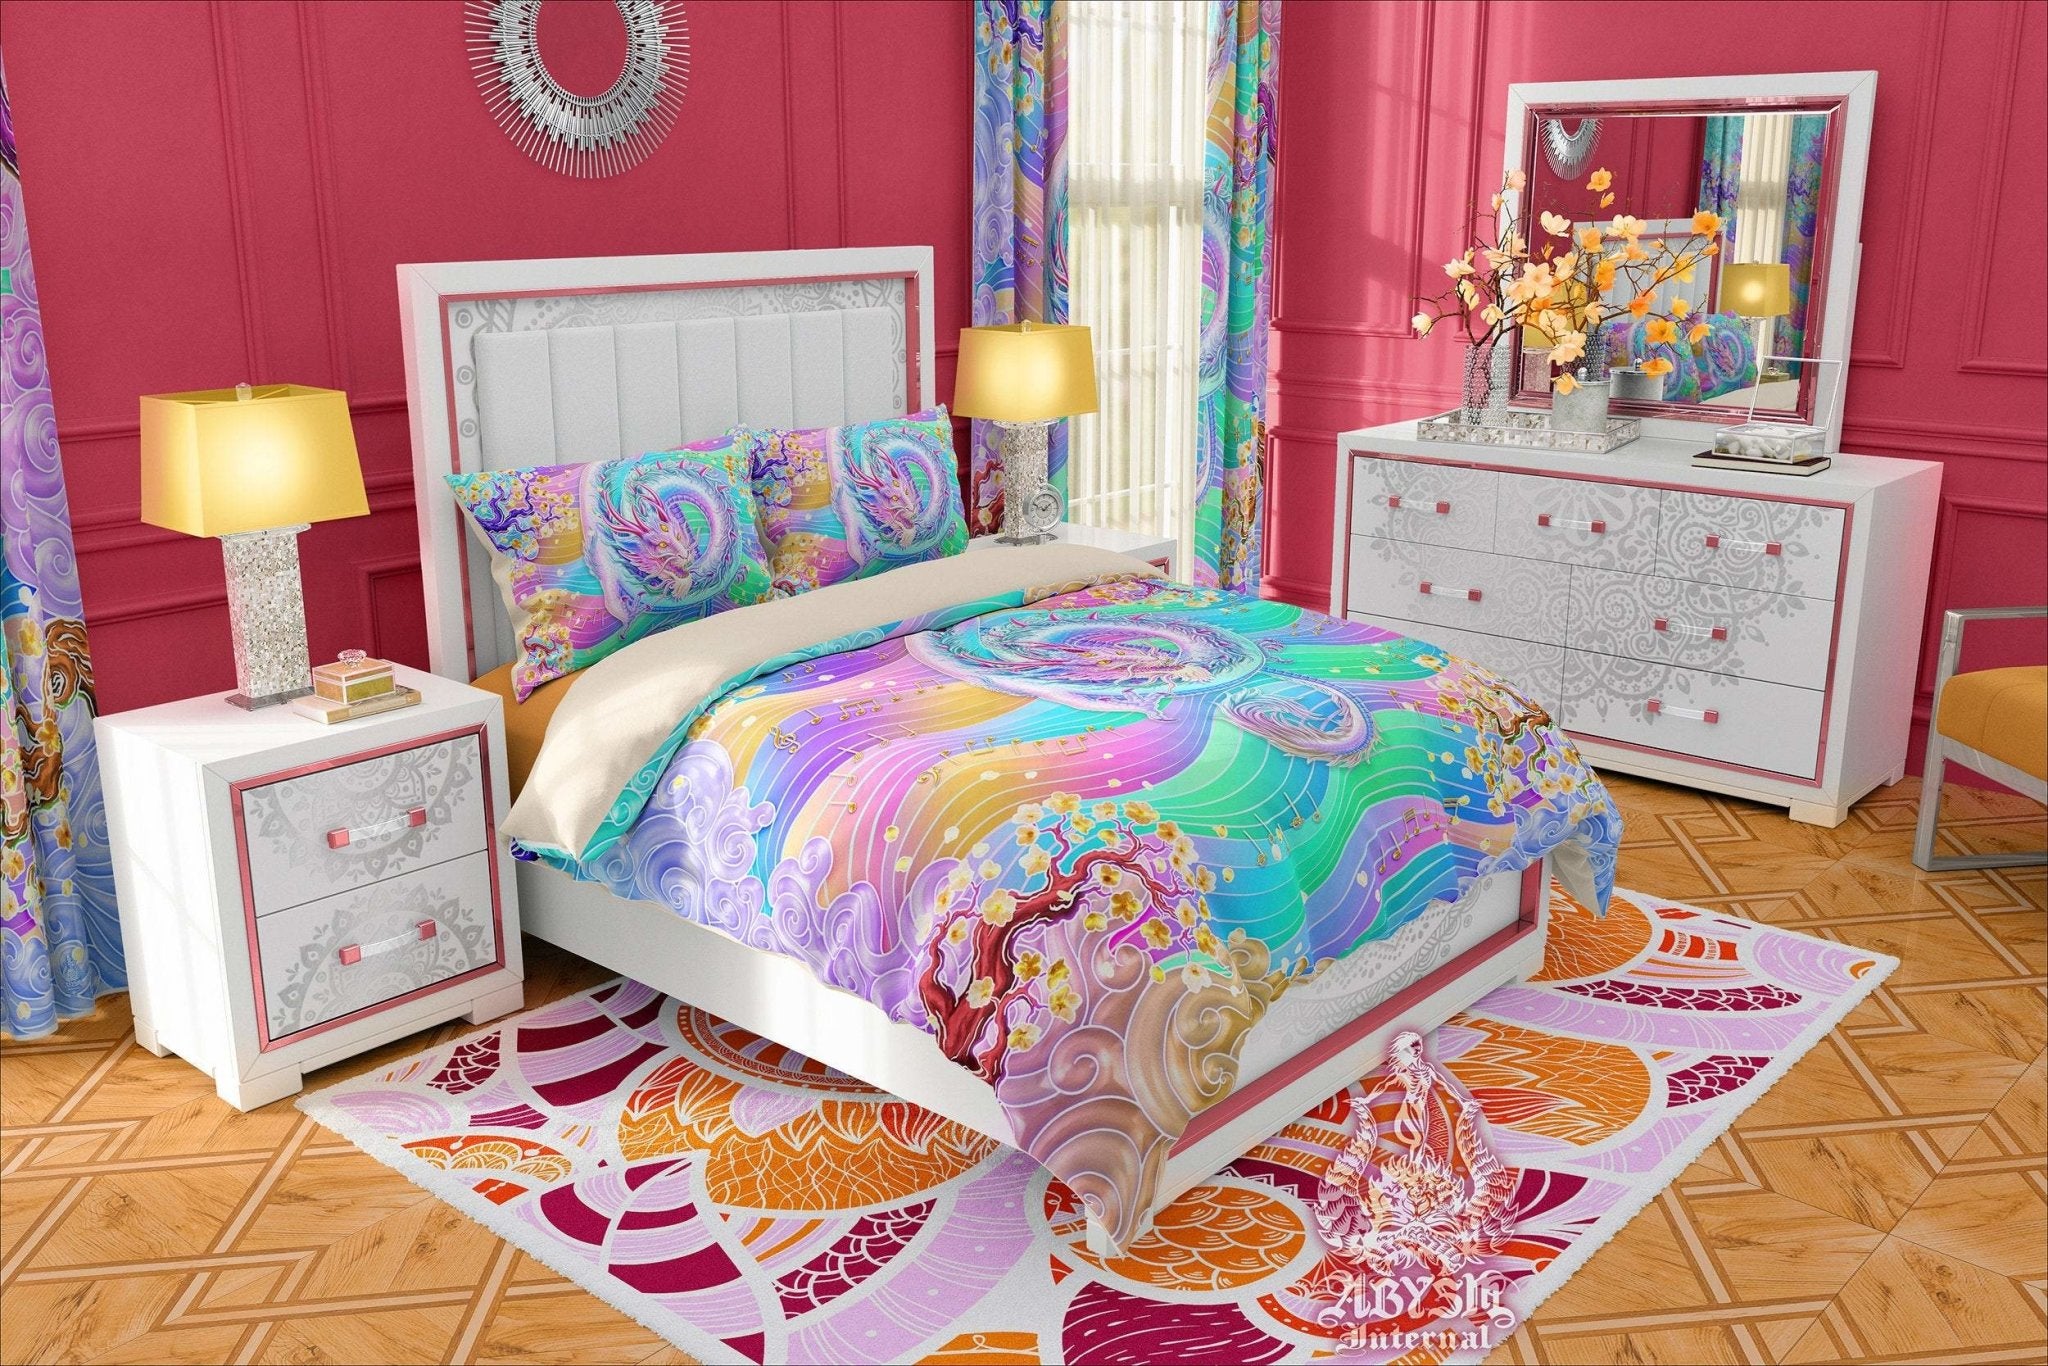 Pastel Dragon Bedding Set, Comforter and Duvet, Aesthetic Bed Cover, Kawaii Kawaii Gamer Bedroom Decor, King, Queen and Twin Size - Music Art - Abysm Internal